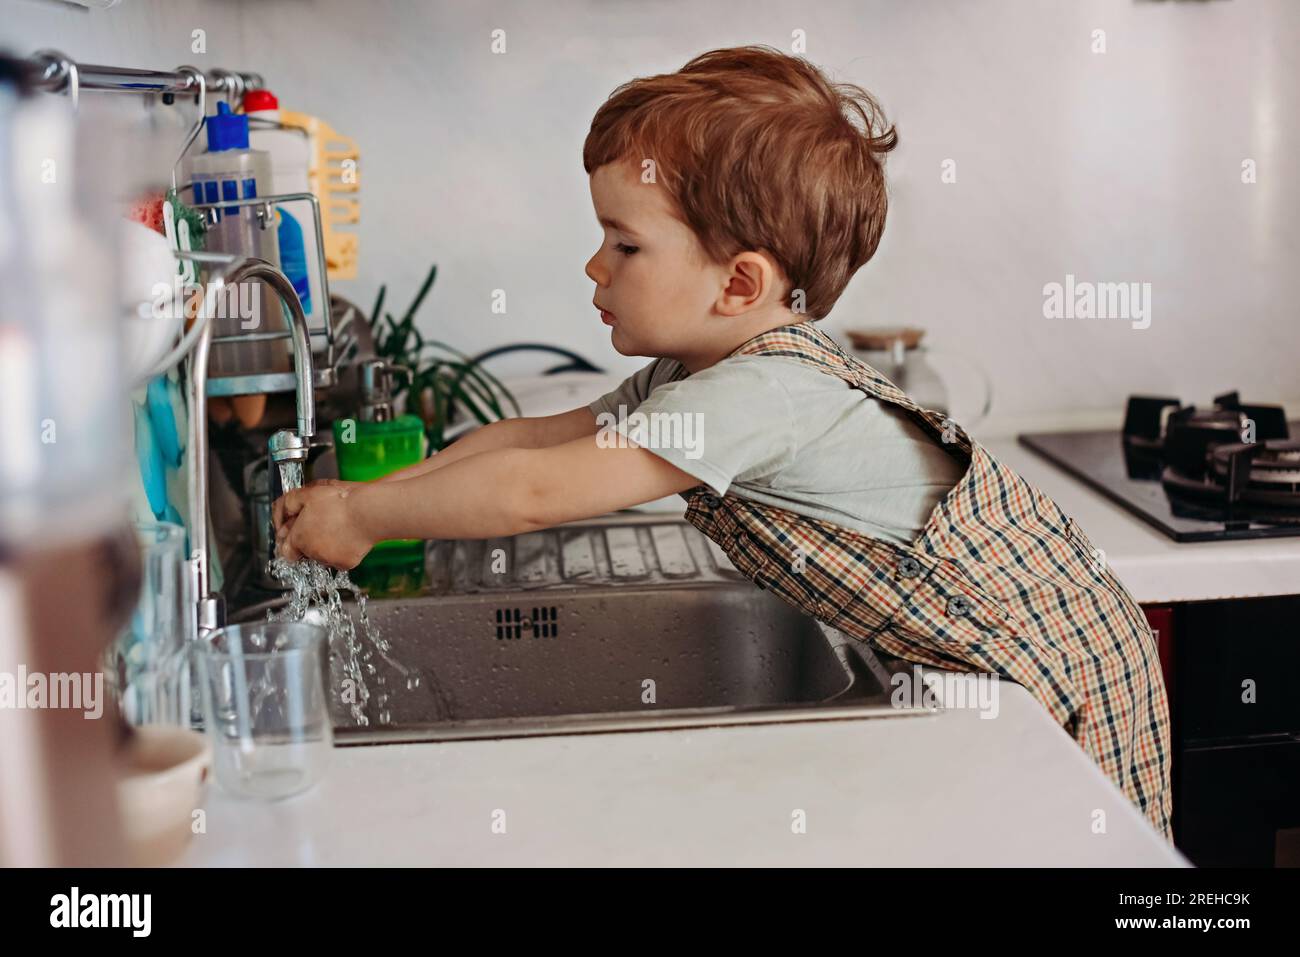 The boy washes his hands in the kitchen. Stock Photo